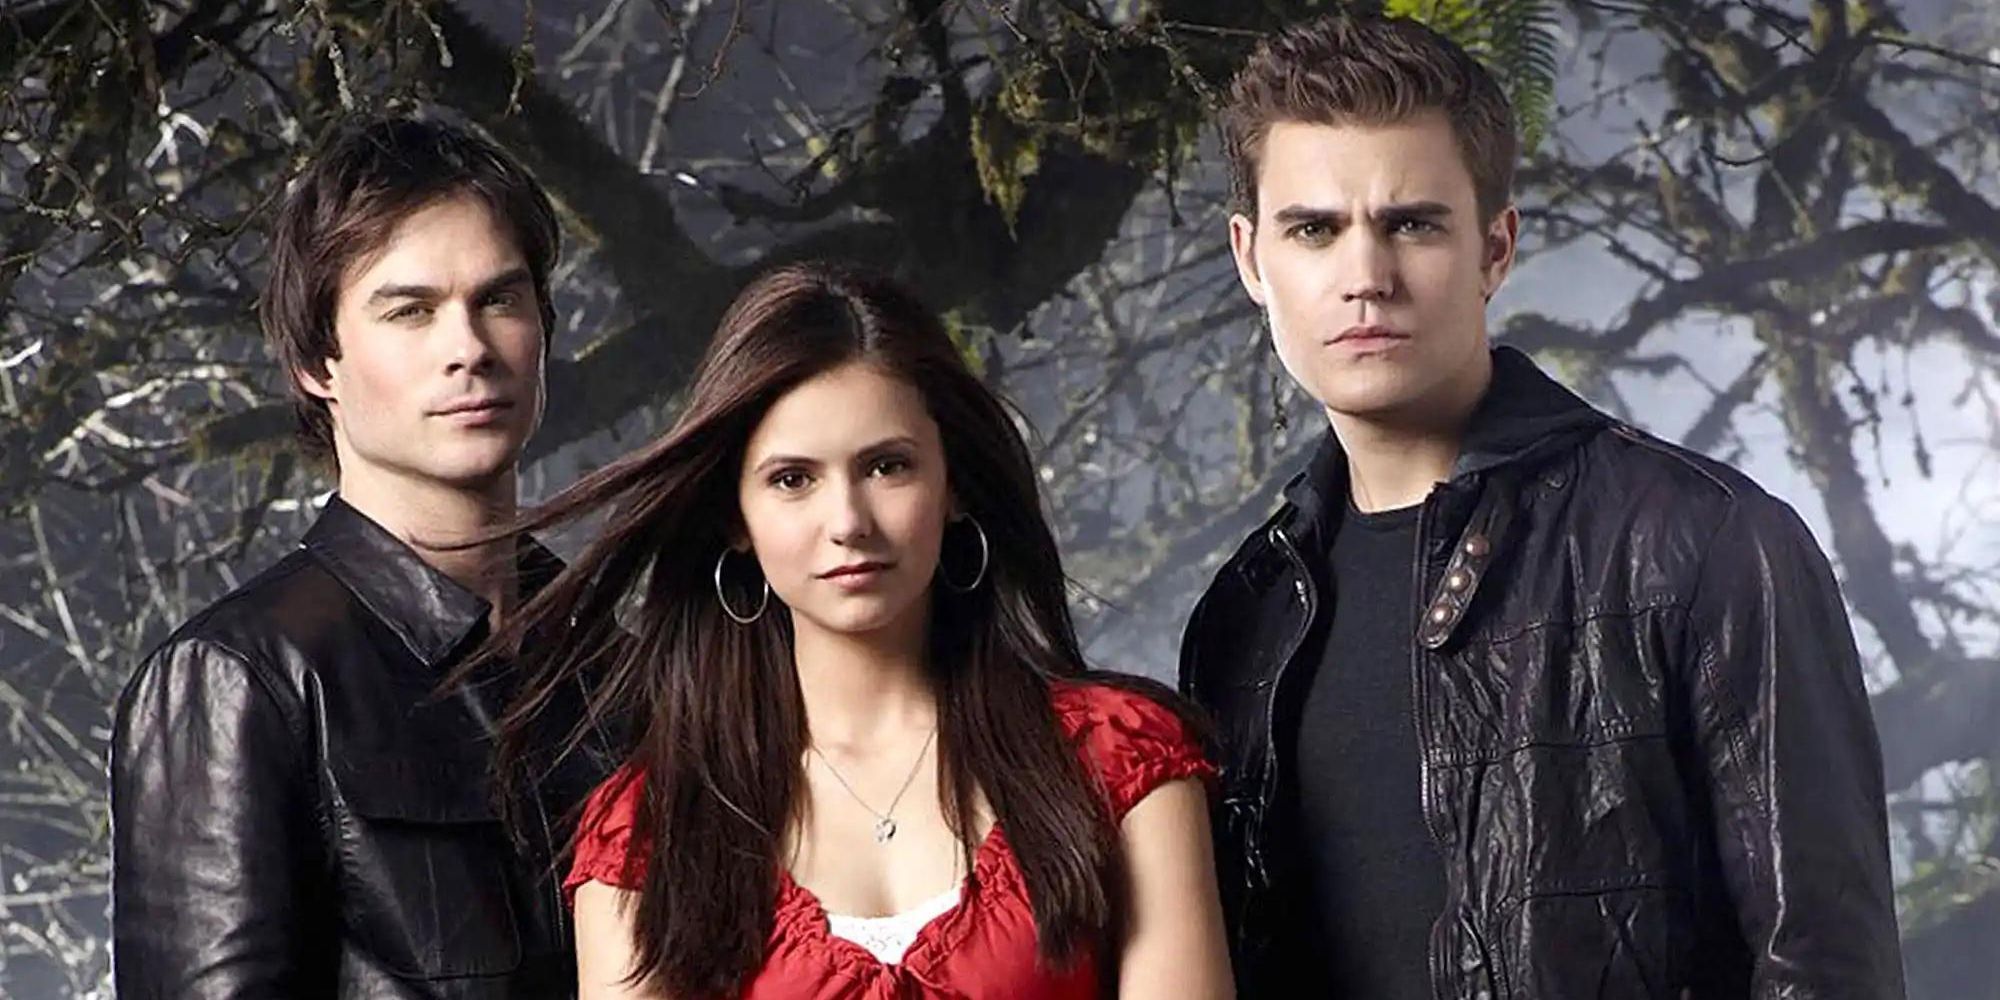 Elena, Damon and Stefan from The Vampire Diaries standing together